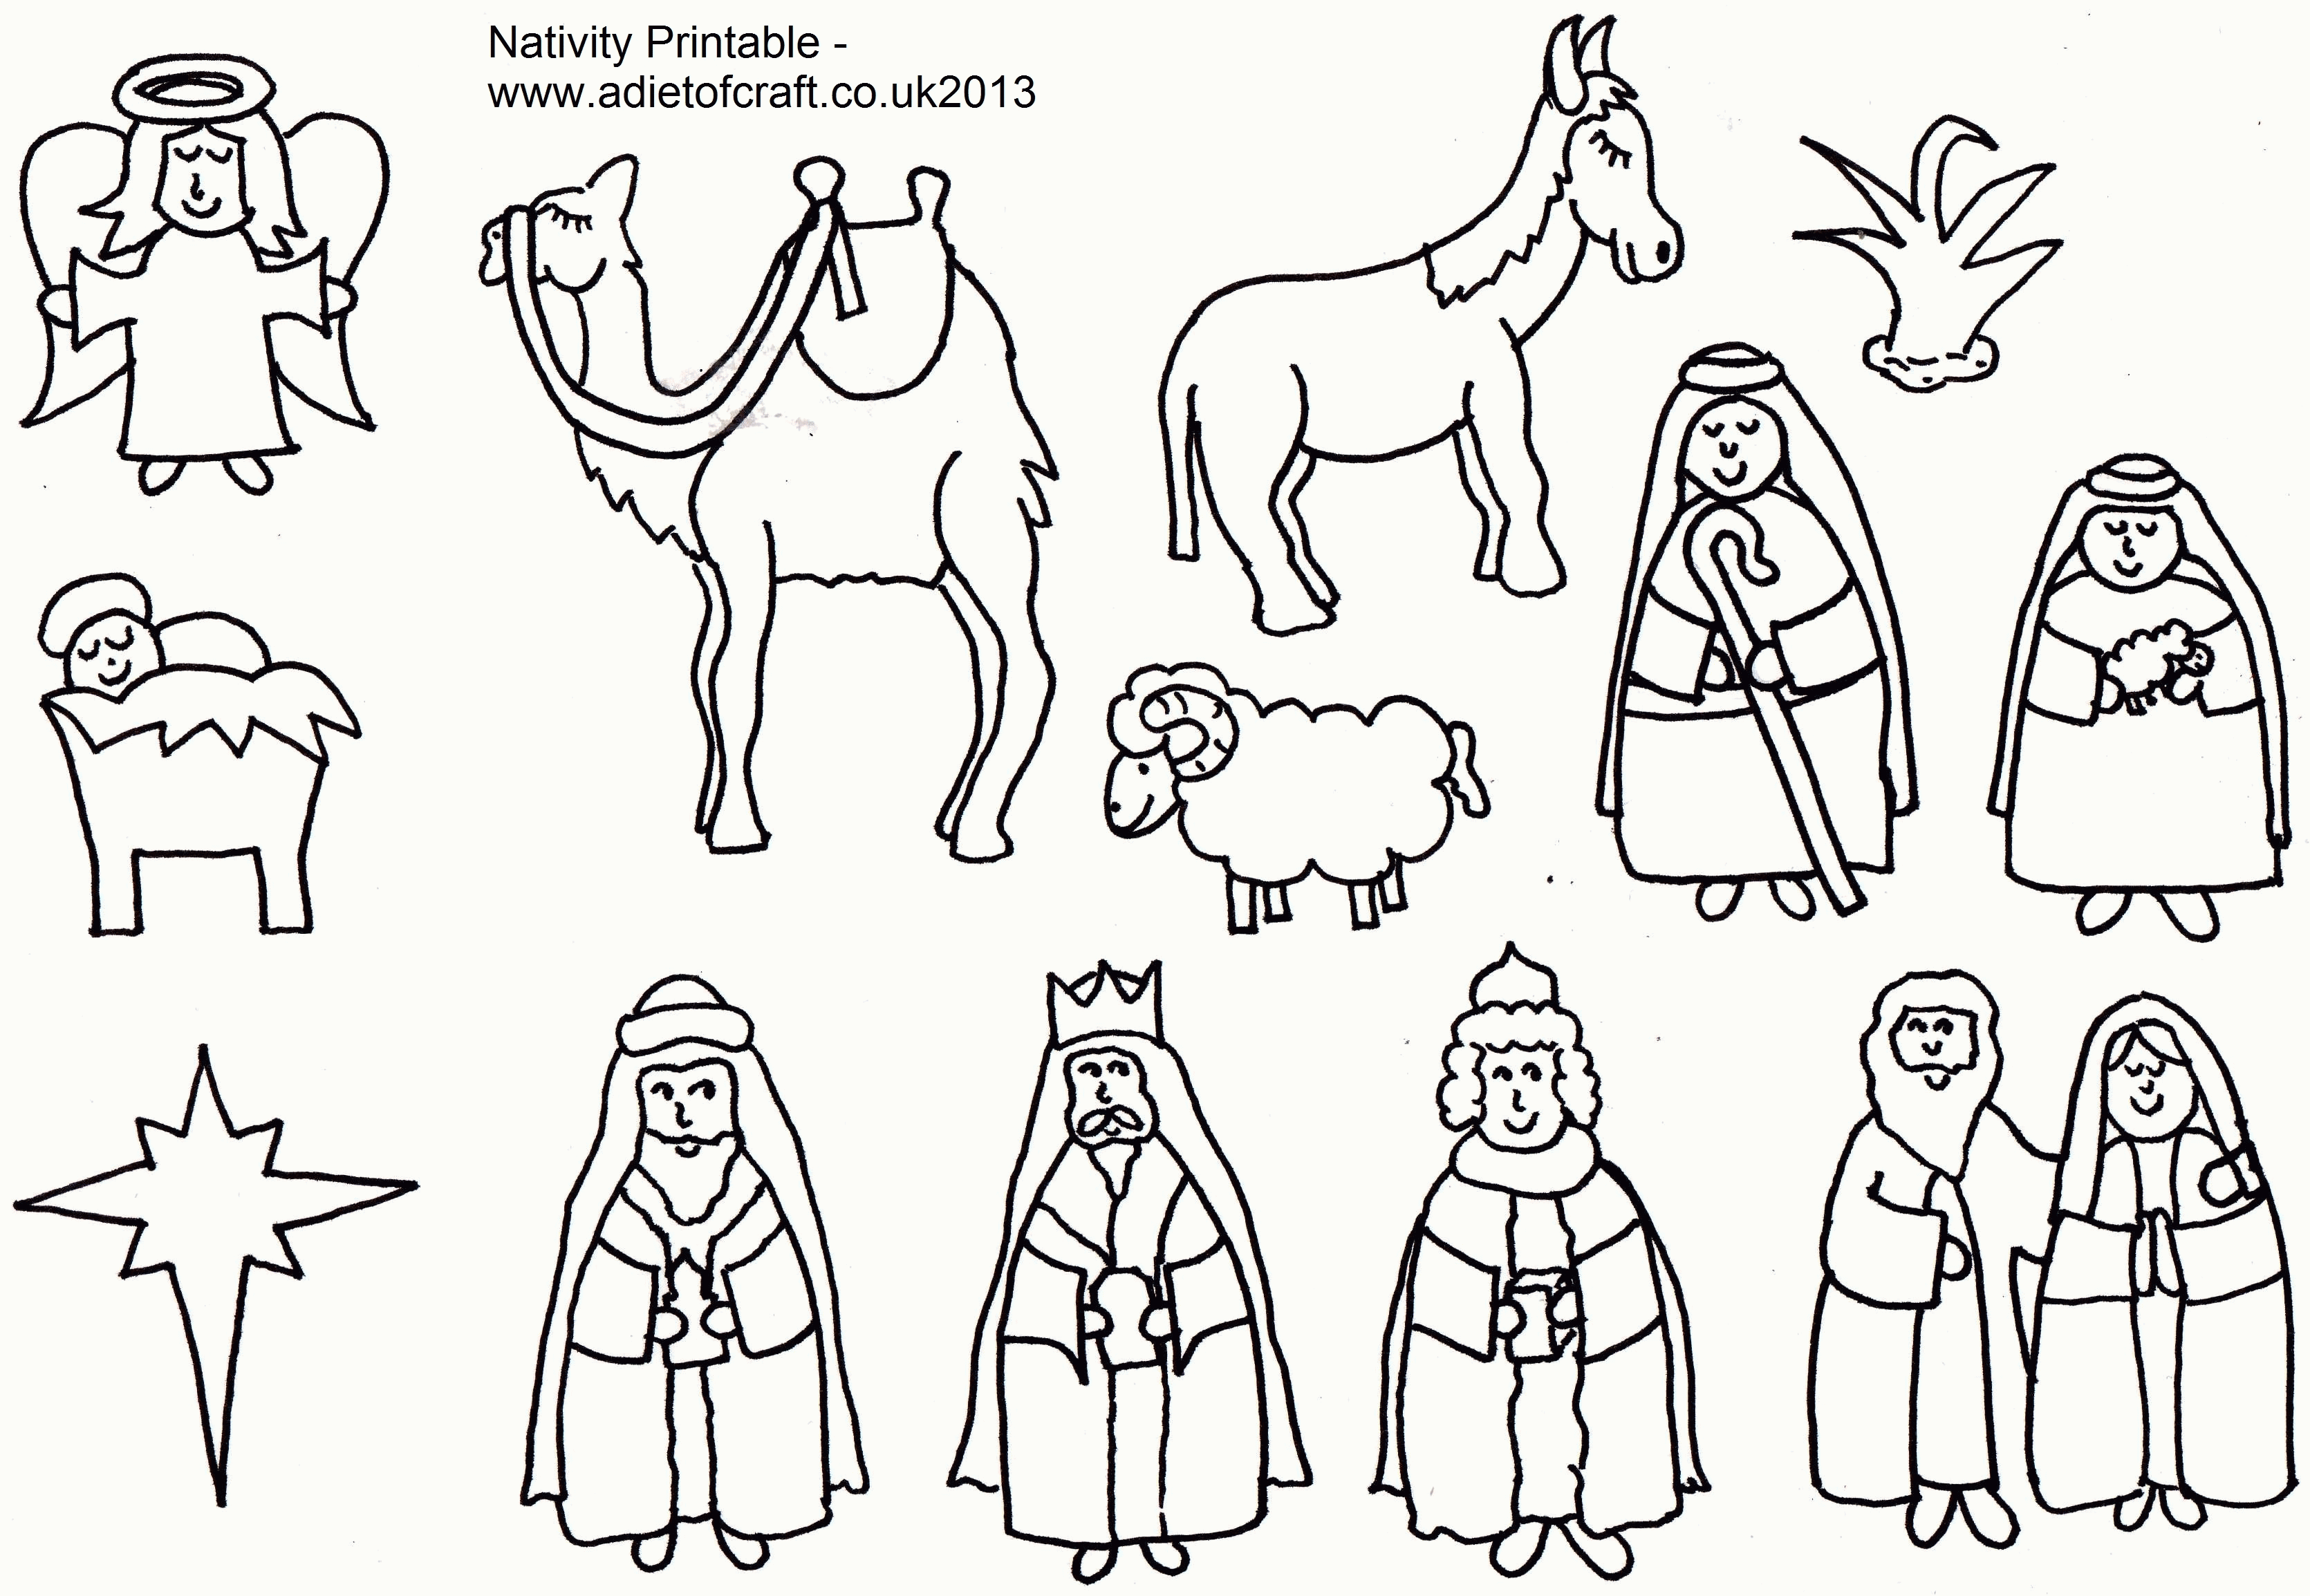 Christmas Nativity Coloring Pages To Print - Coloring Page